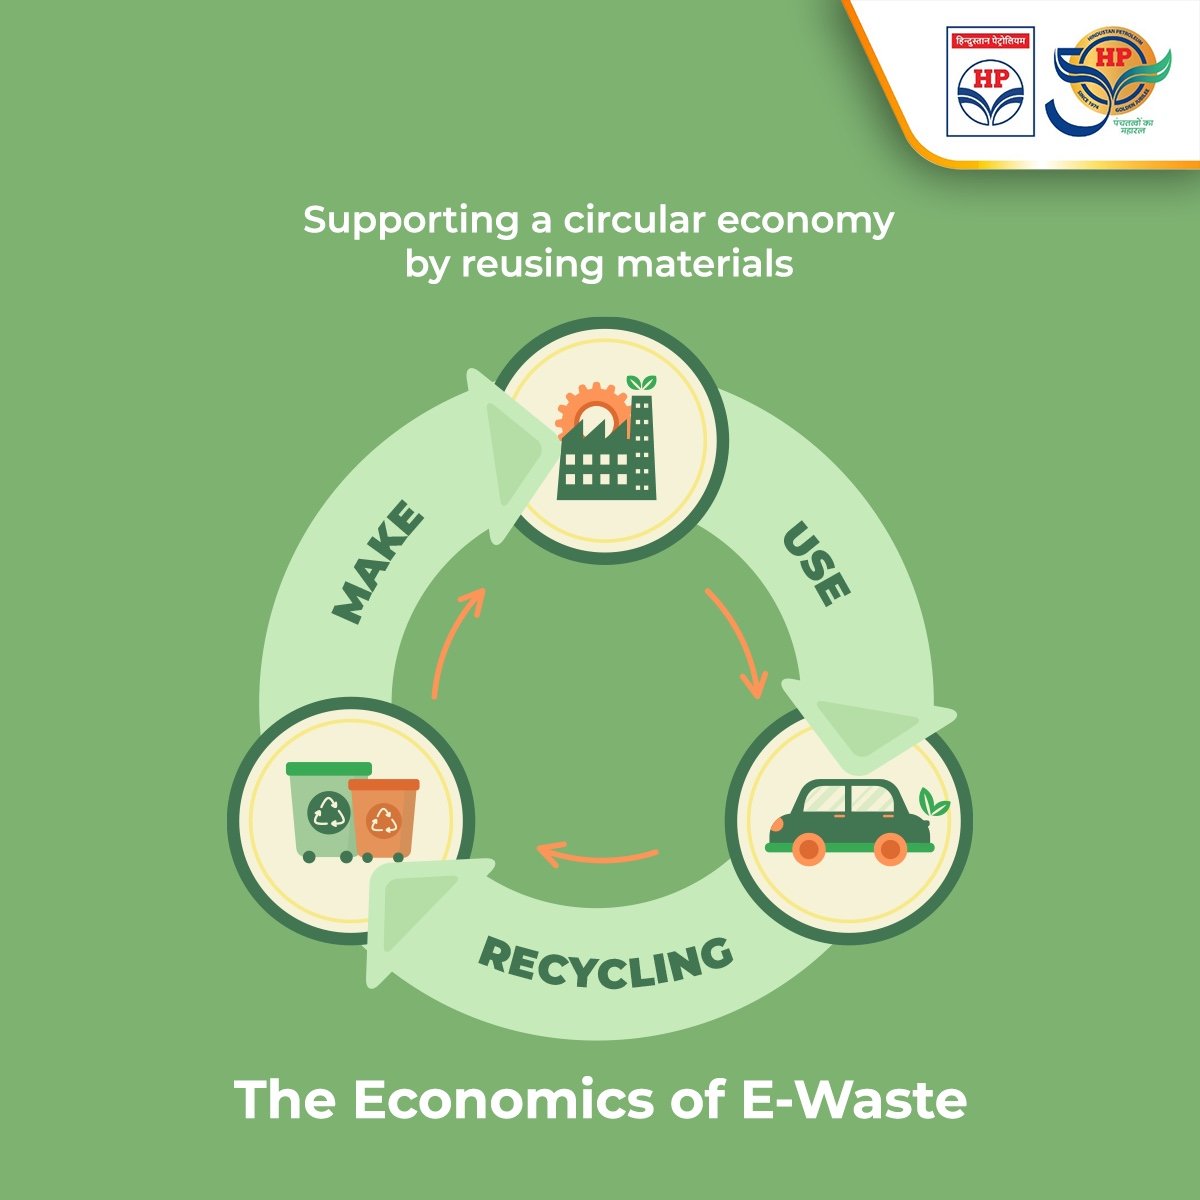 Waste electronic and electrical equipment, commonly termed E-waste, is one of the most complex environmental challenges facing the world due to the sheer volumes. However, recycling of e-waste has huge economic potential as the metals retrieved can be reused and saved from being